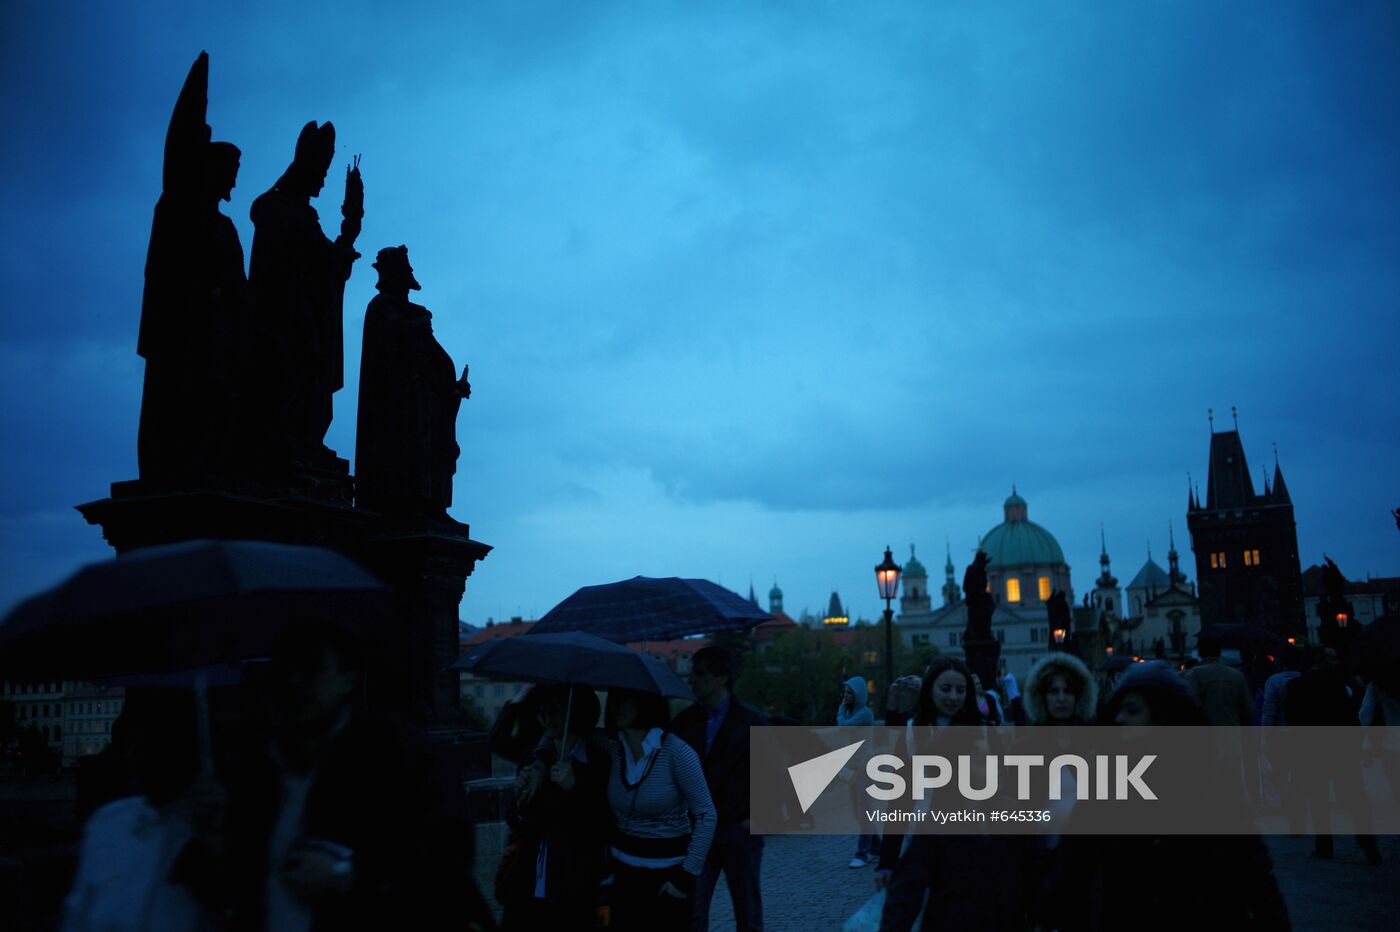 Tourists on the Charles Bridge (Karluv Most)